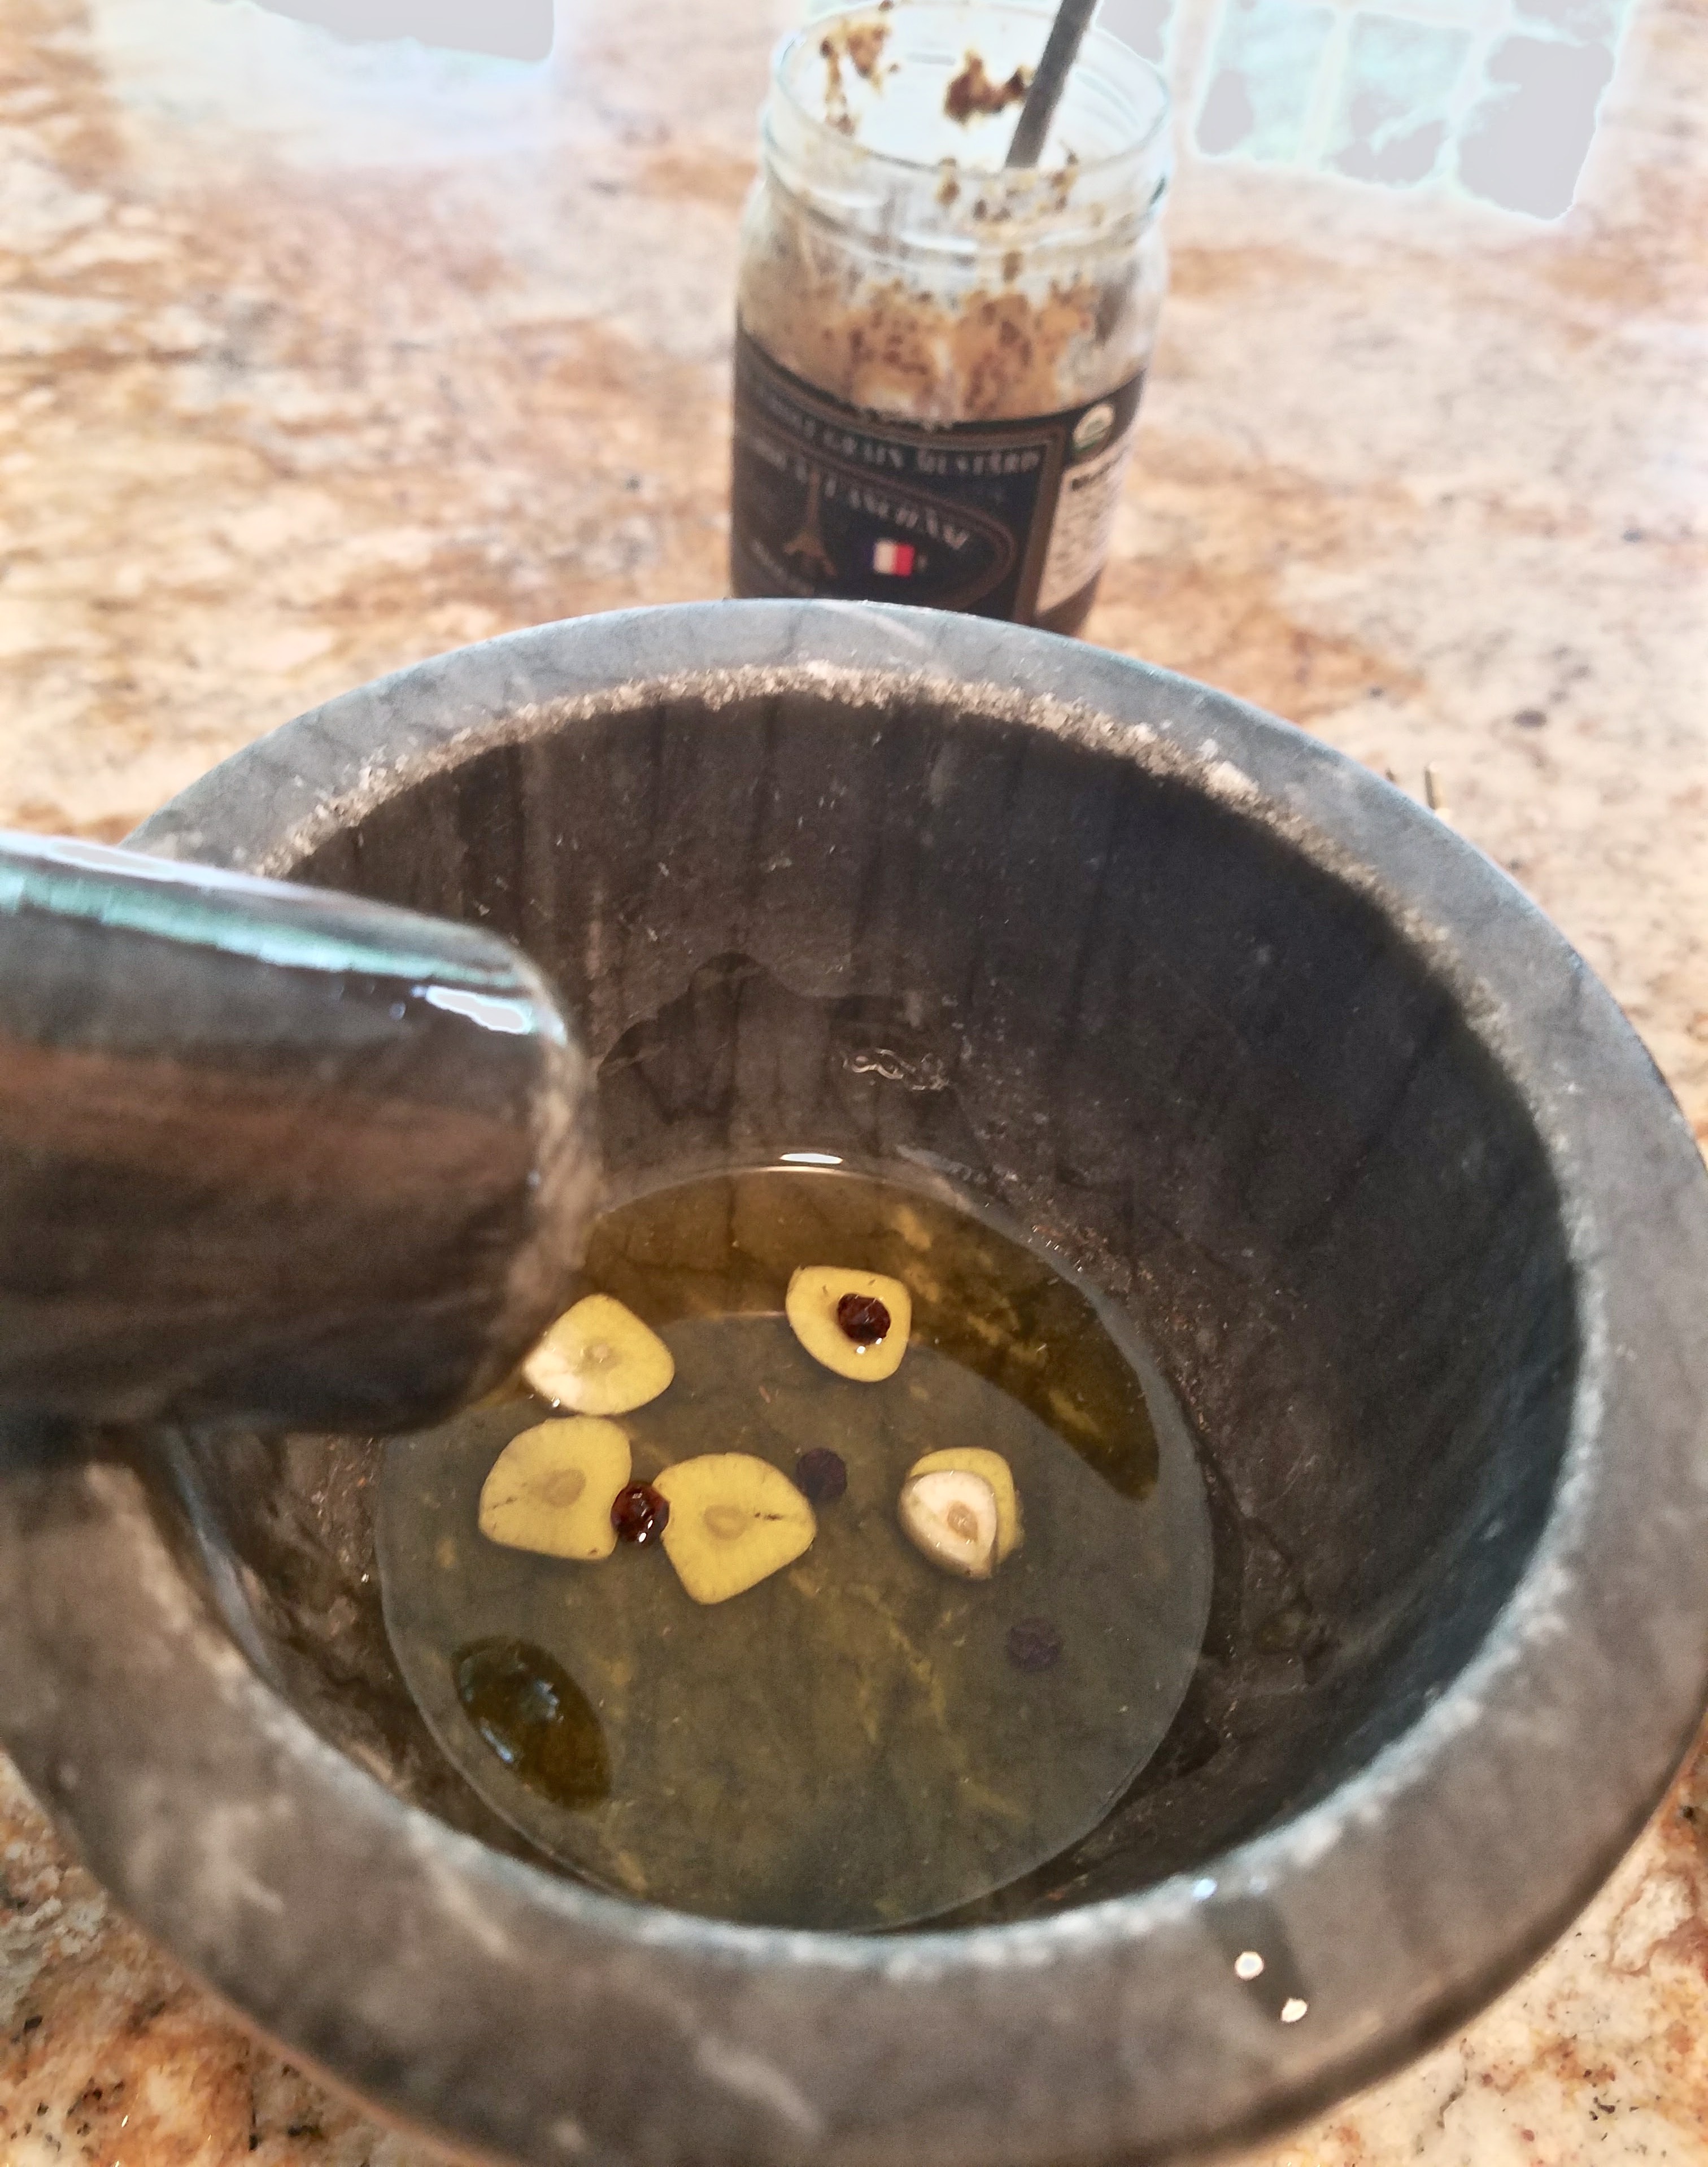 French vinaigrette salad dressing starts in a mortar and pestle